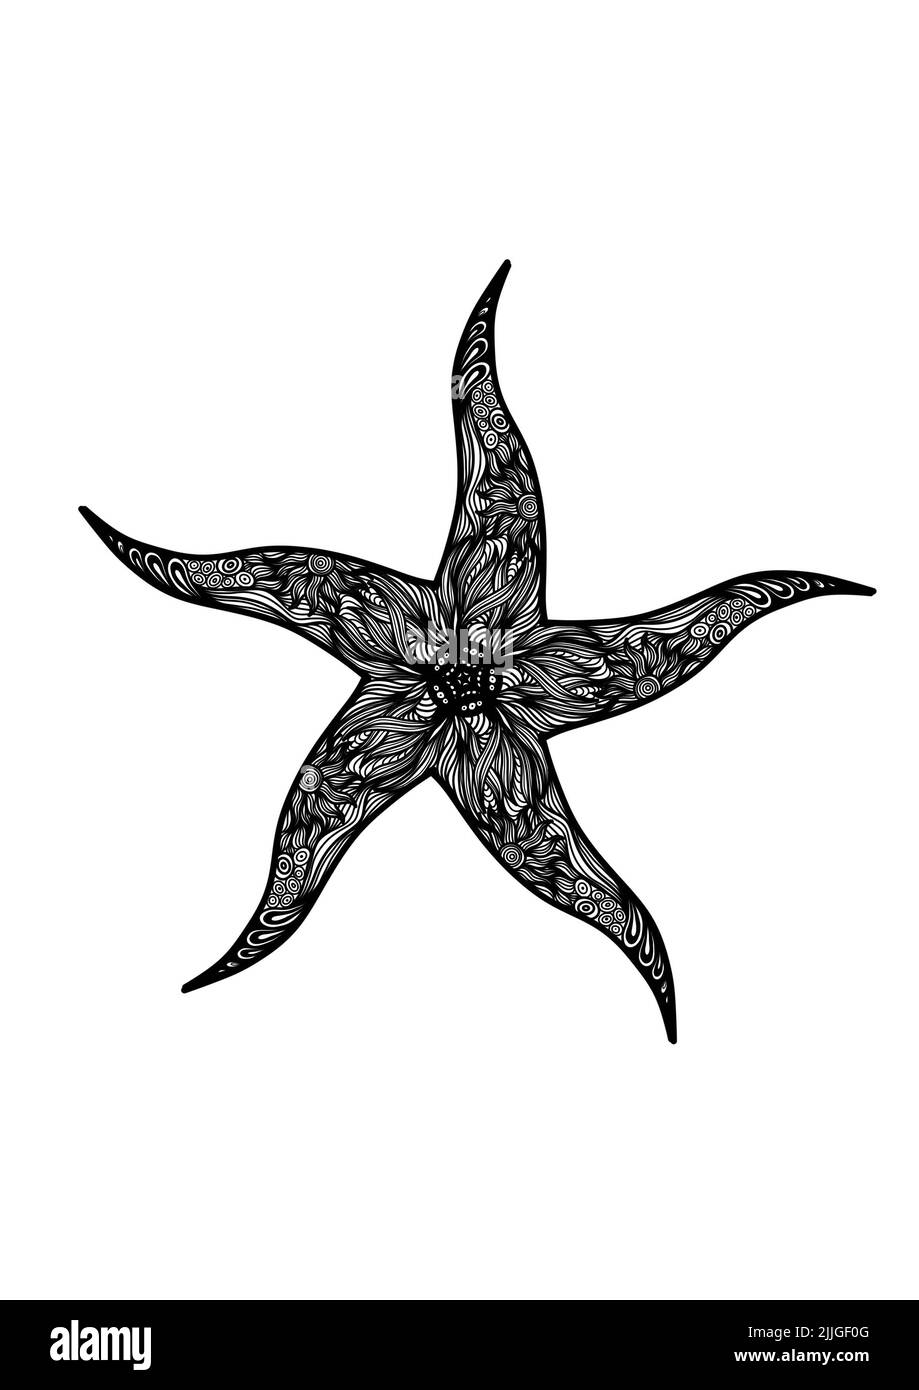 A Black and white line art  drawing of a star fish for background, logo and other illustration needs Stock Photo